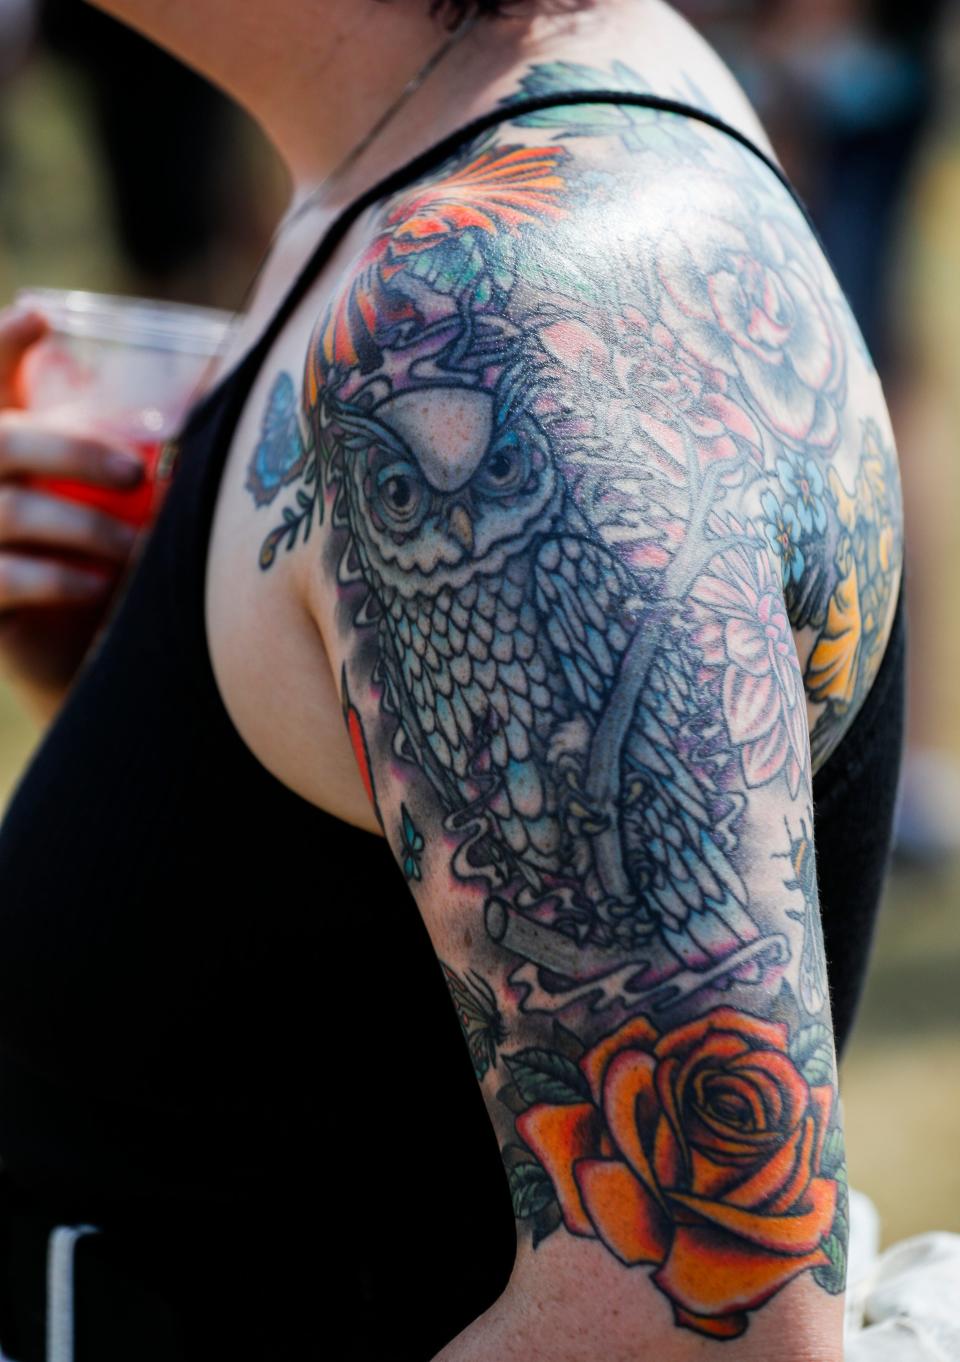 Rock fan's tattoos were on display at Friday's Louder Than Life music festival. Sept. 22, 2023